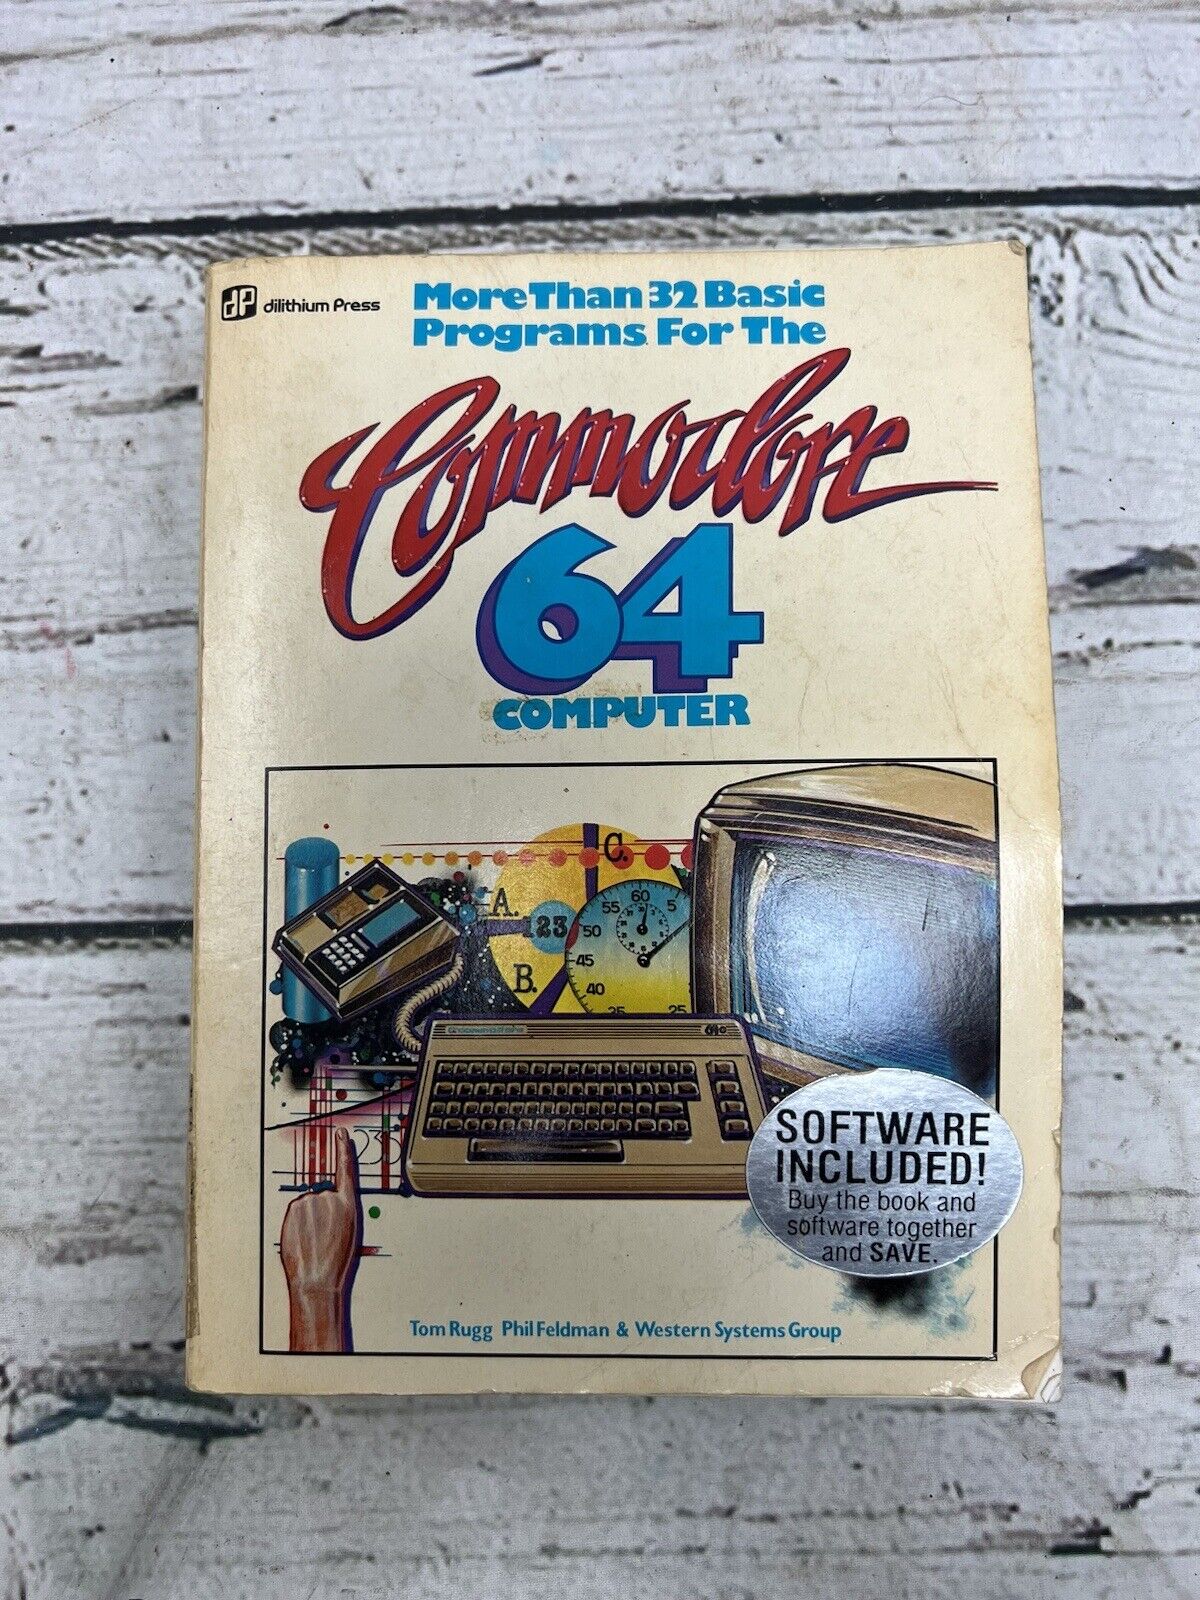 More Than 32 Basic Programs For The Commodore 64 Computer 1983 Book - NO DISK